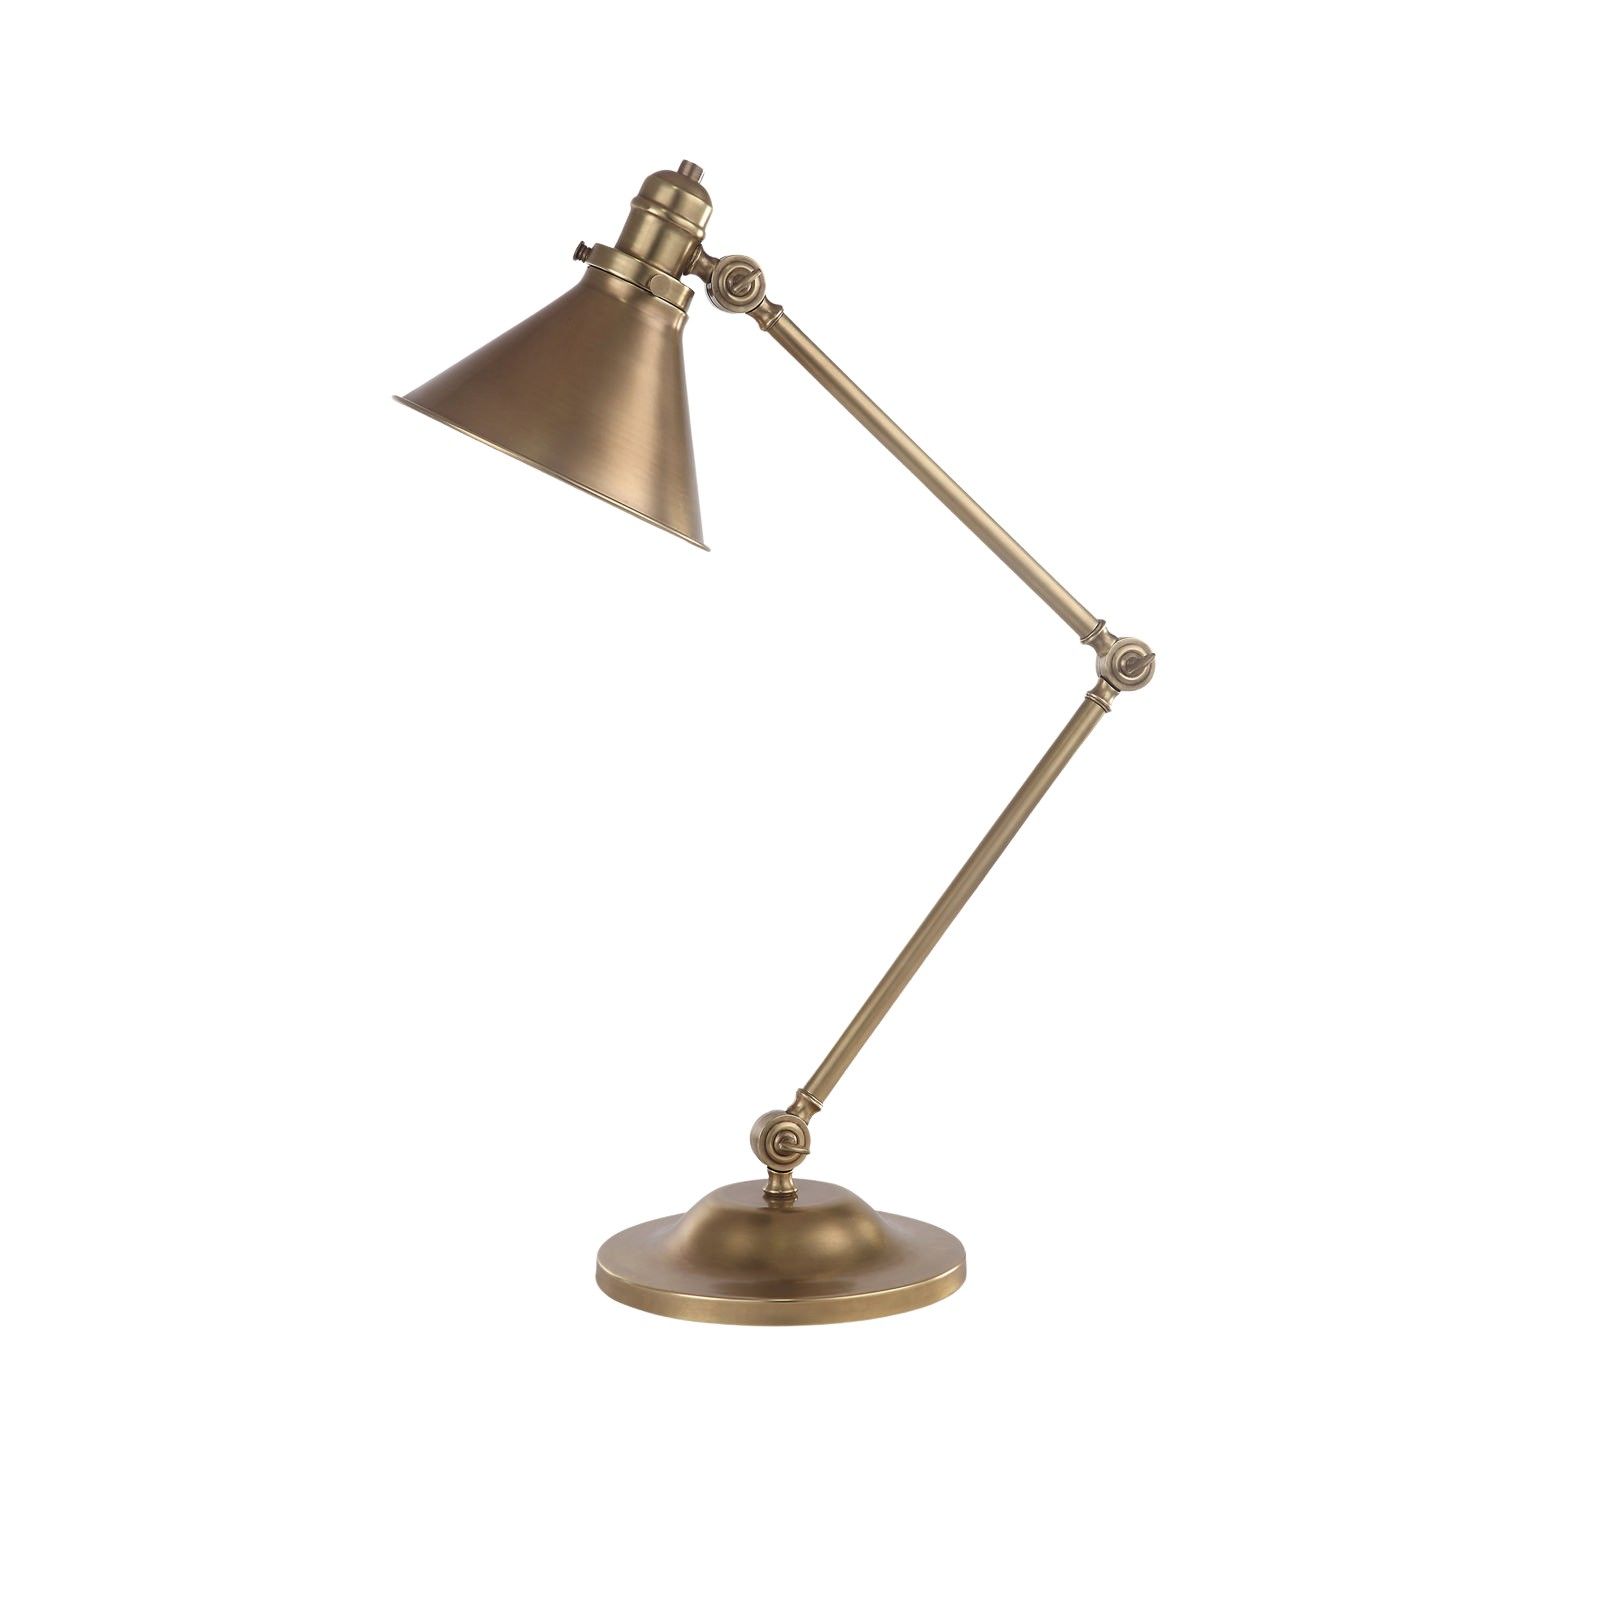 Provence table lamp in Aged Brass